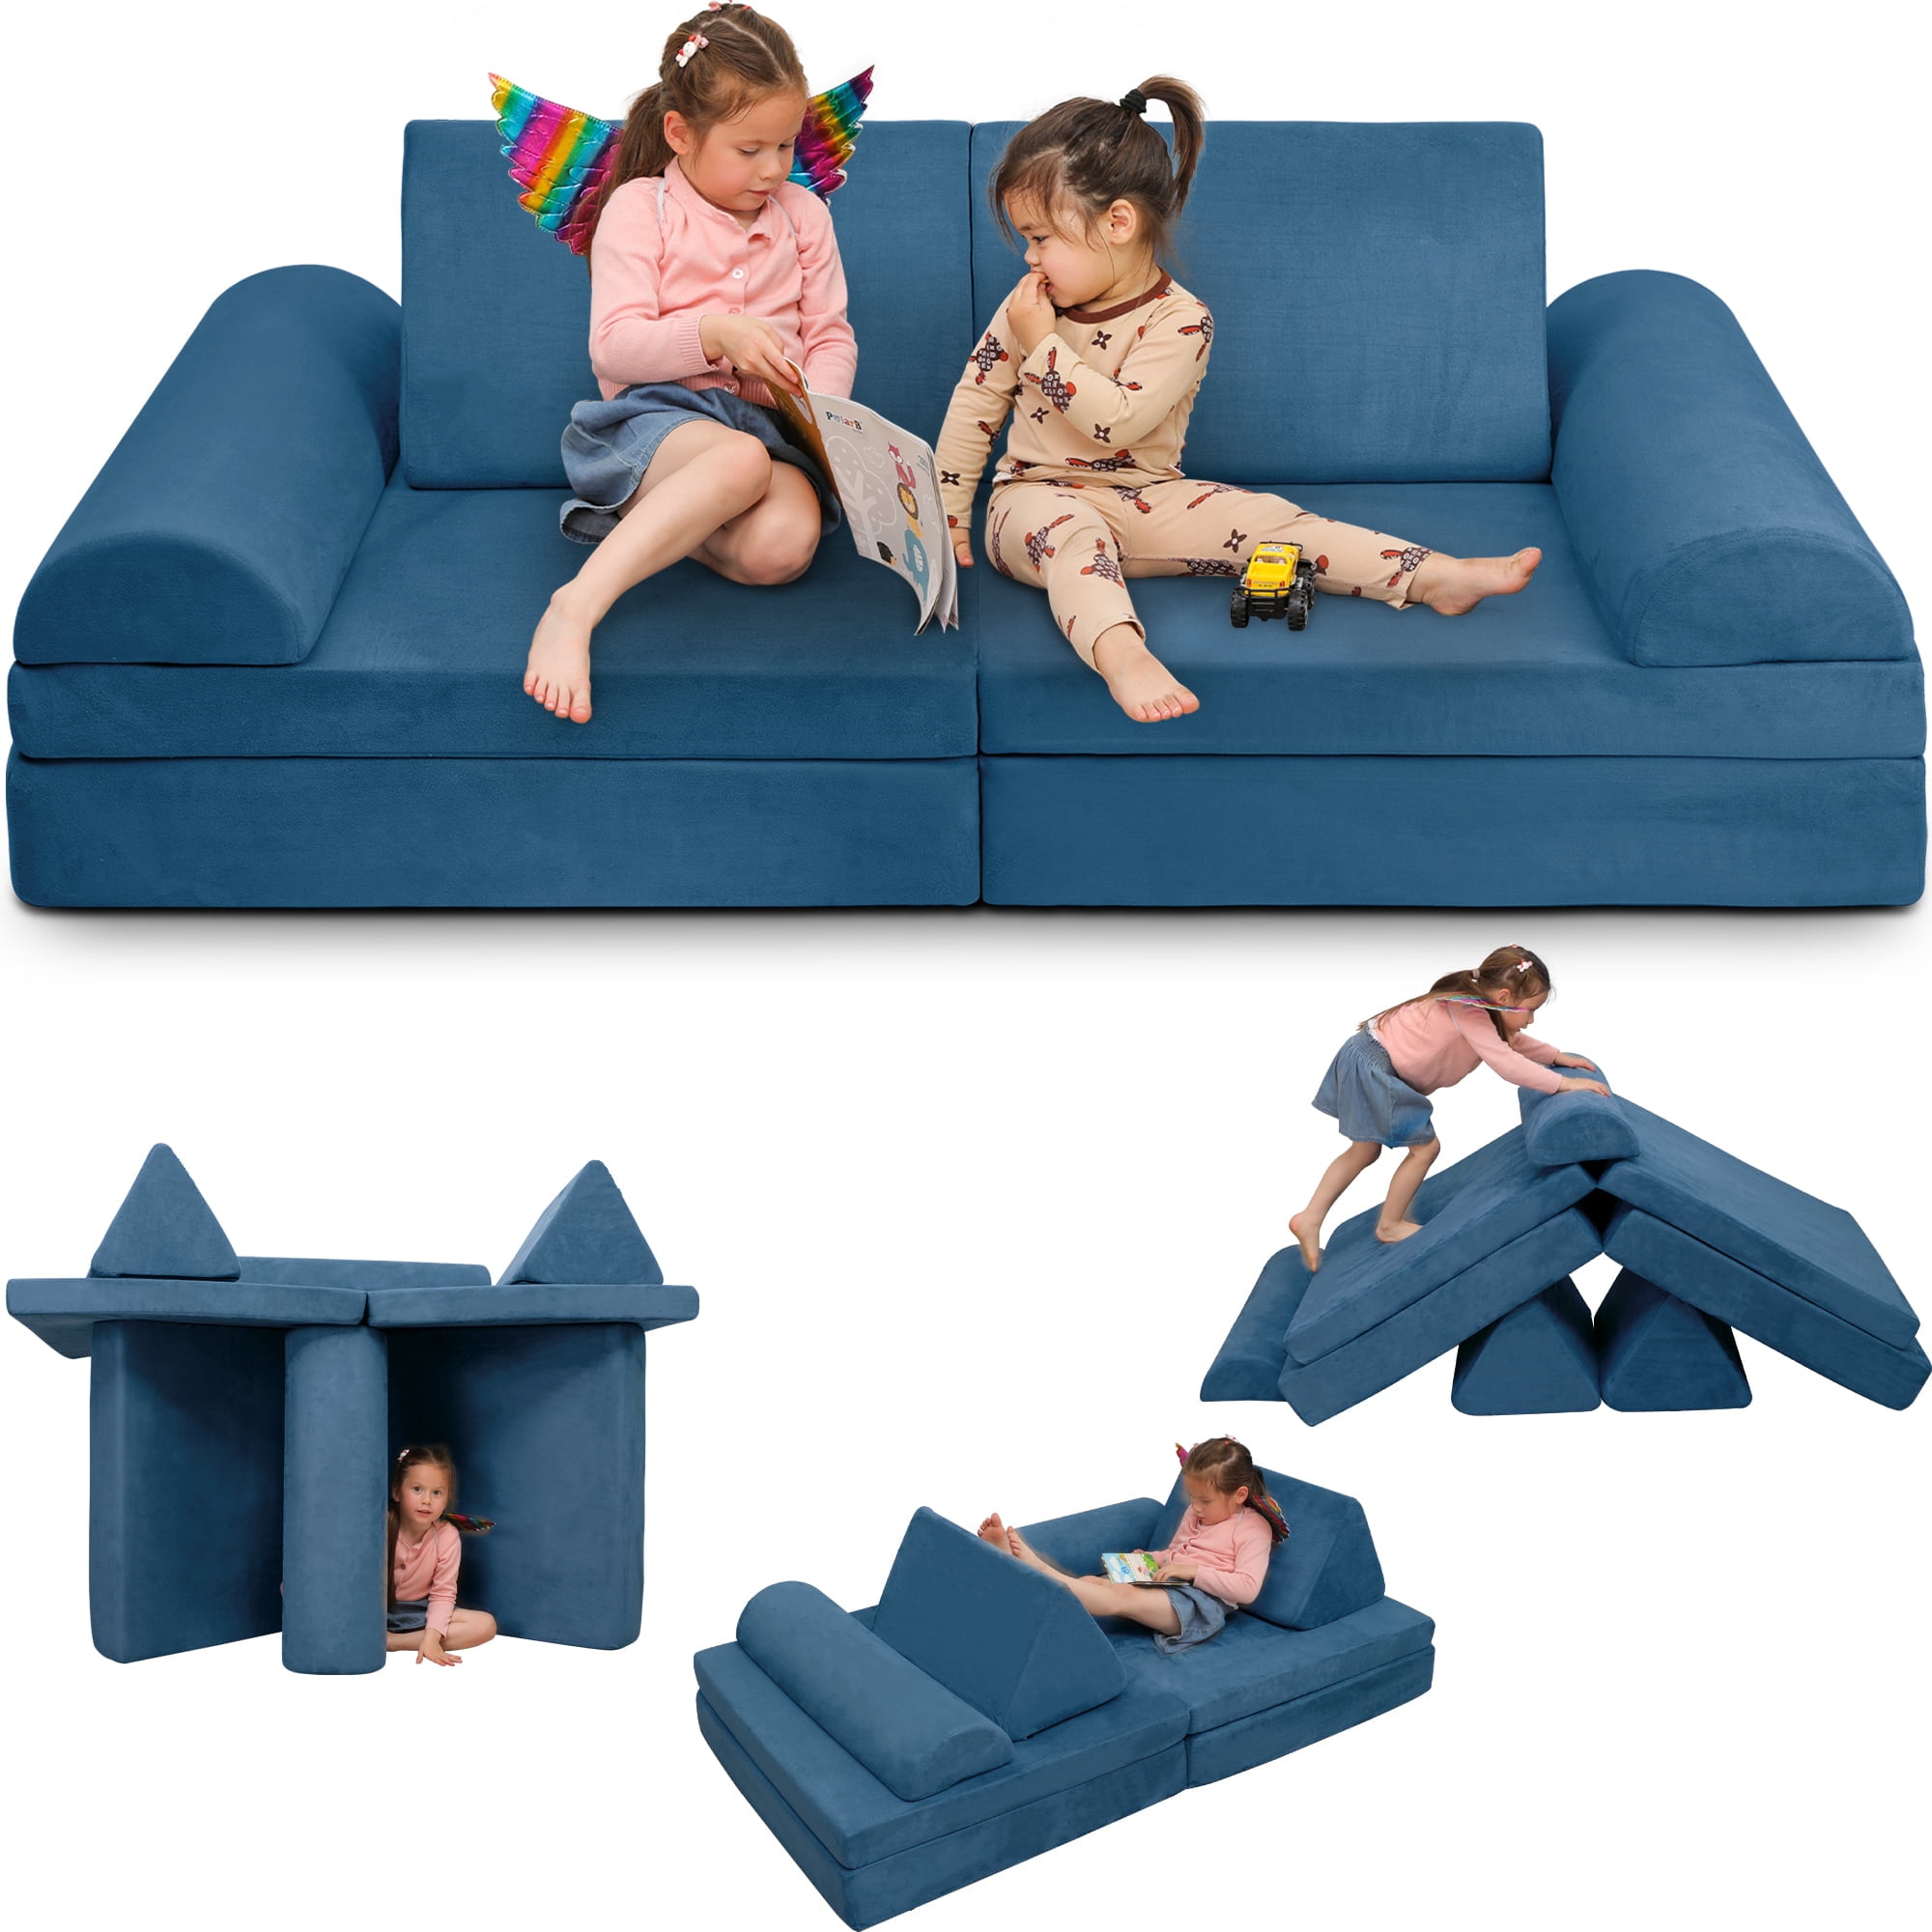 Tolead 6 Blue pcs Couch Navy Toddlers, Large, Furniture, for Kids Play Imaginative